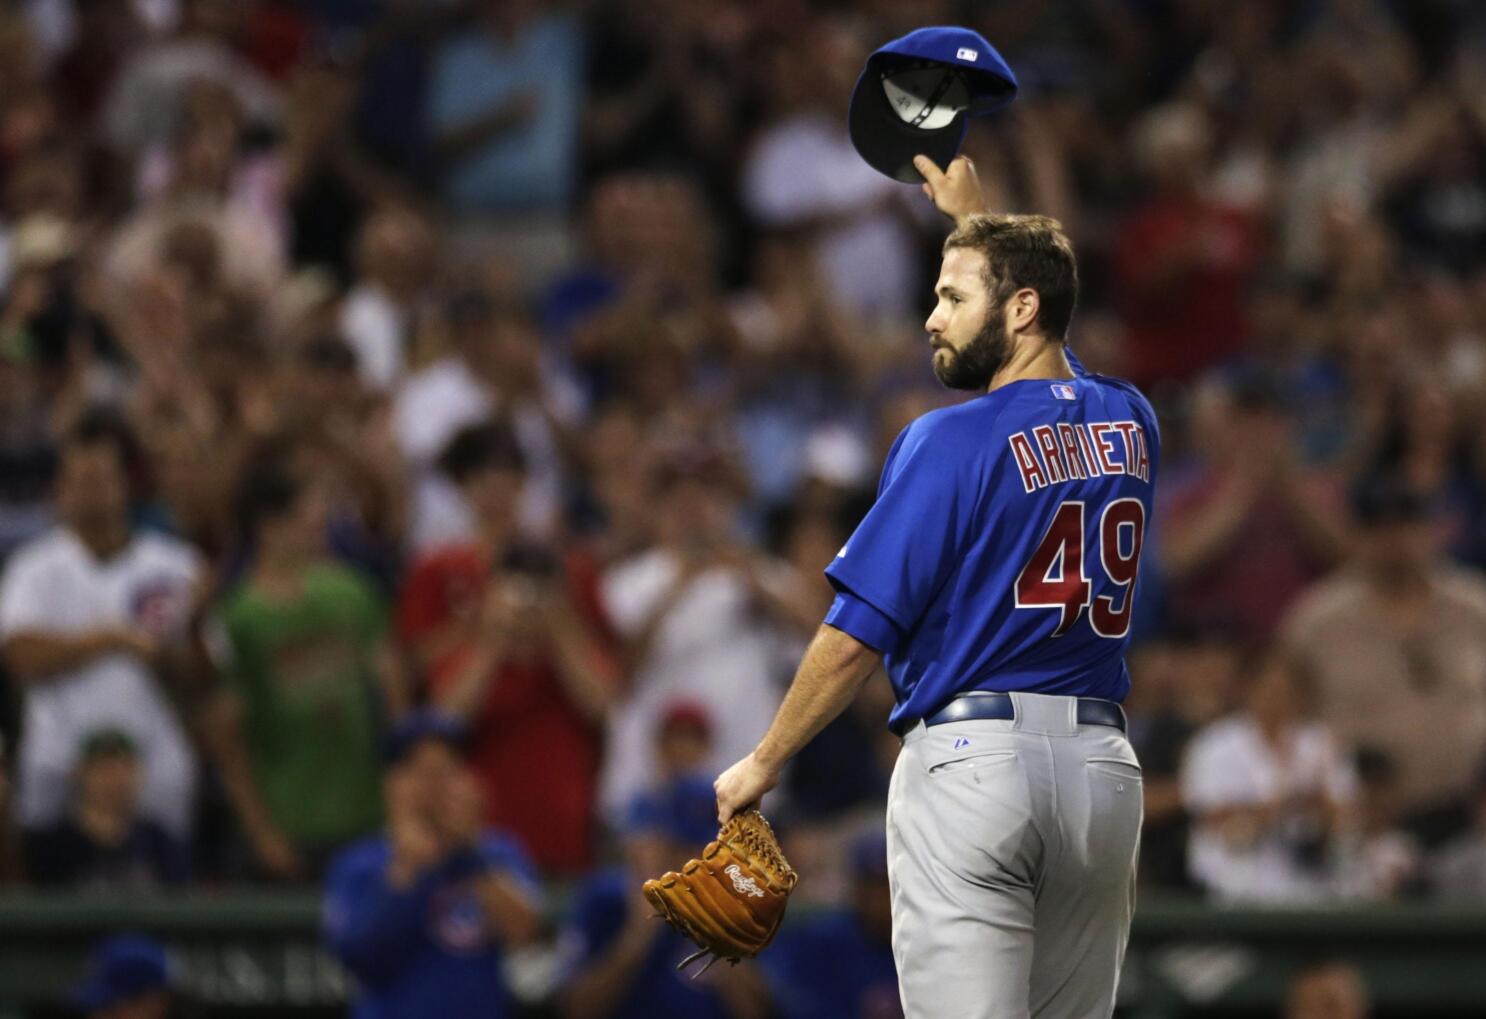 Former Cy Young winner Jake Arrieta announces his retirement